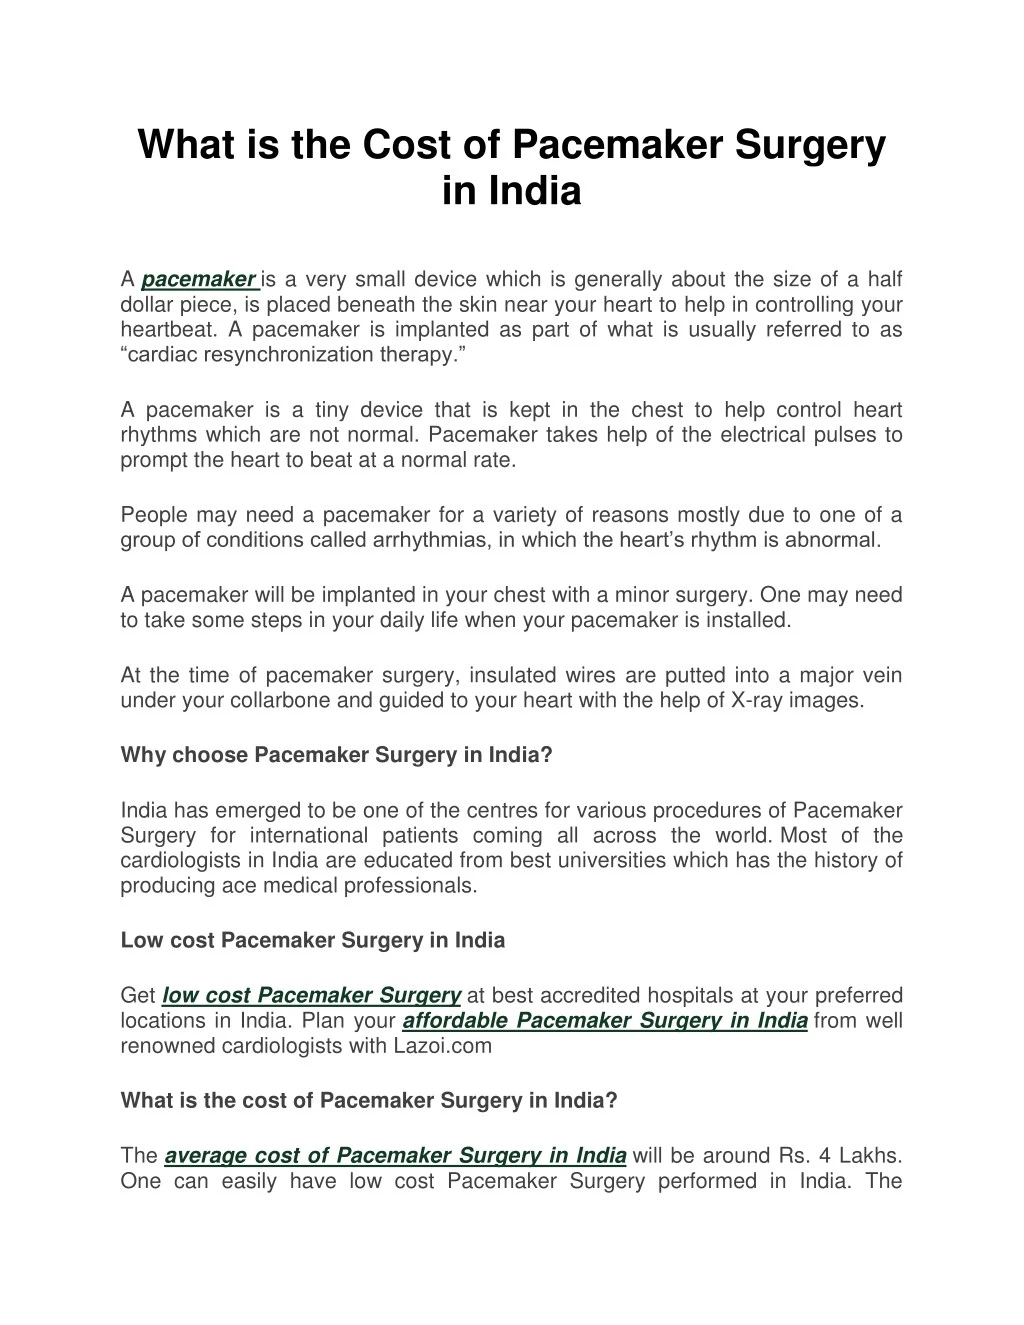 what is the cost of pacemaker surgery in india